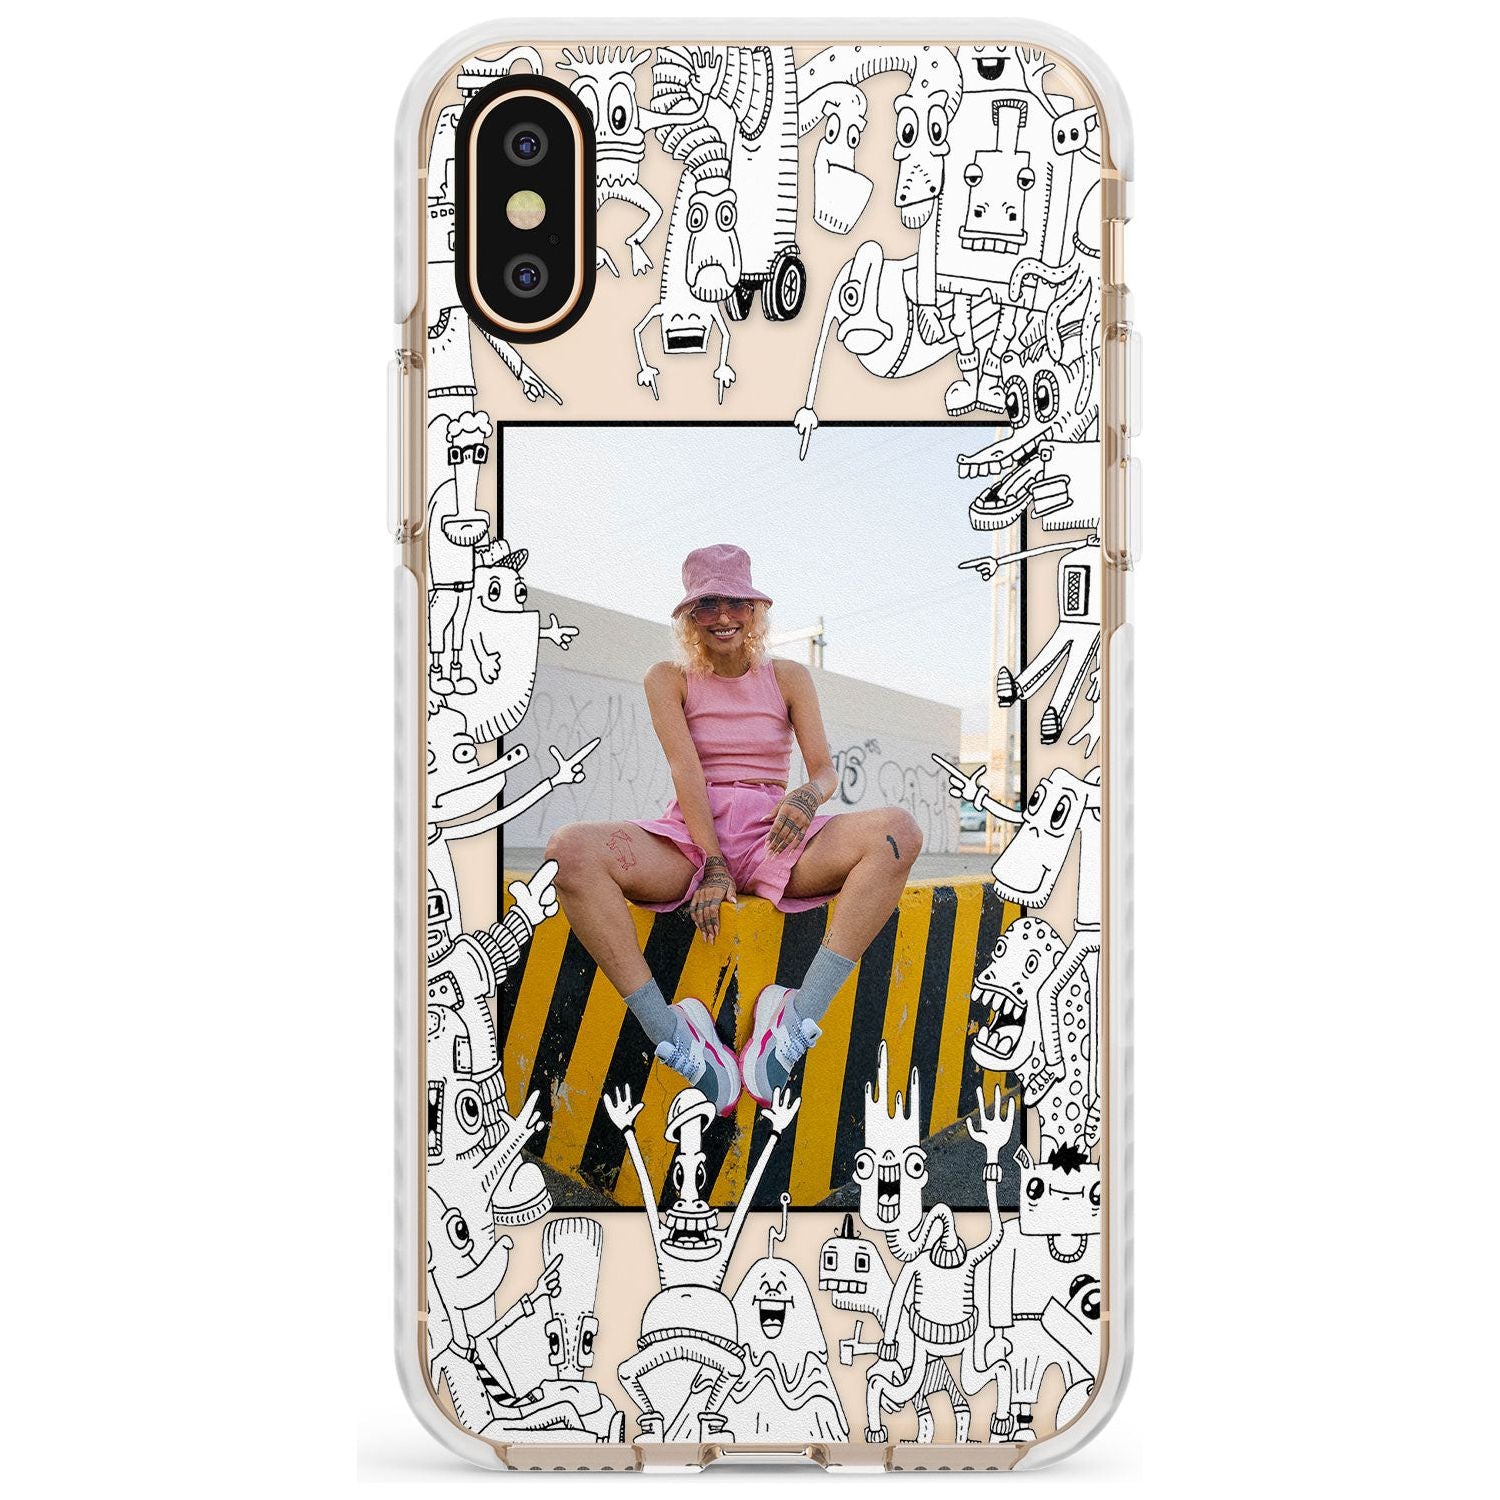 Personalised Look At This Photo Case Impact Phone Case for iPhone X XS Max XR